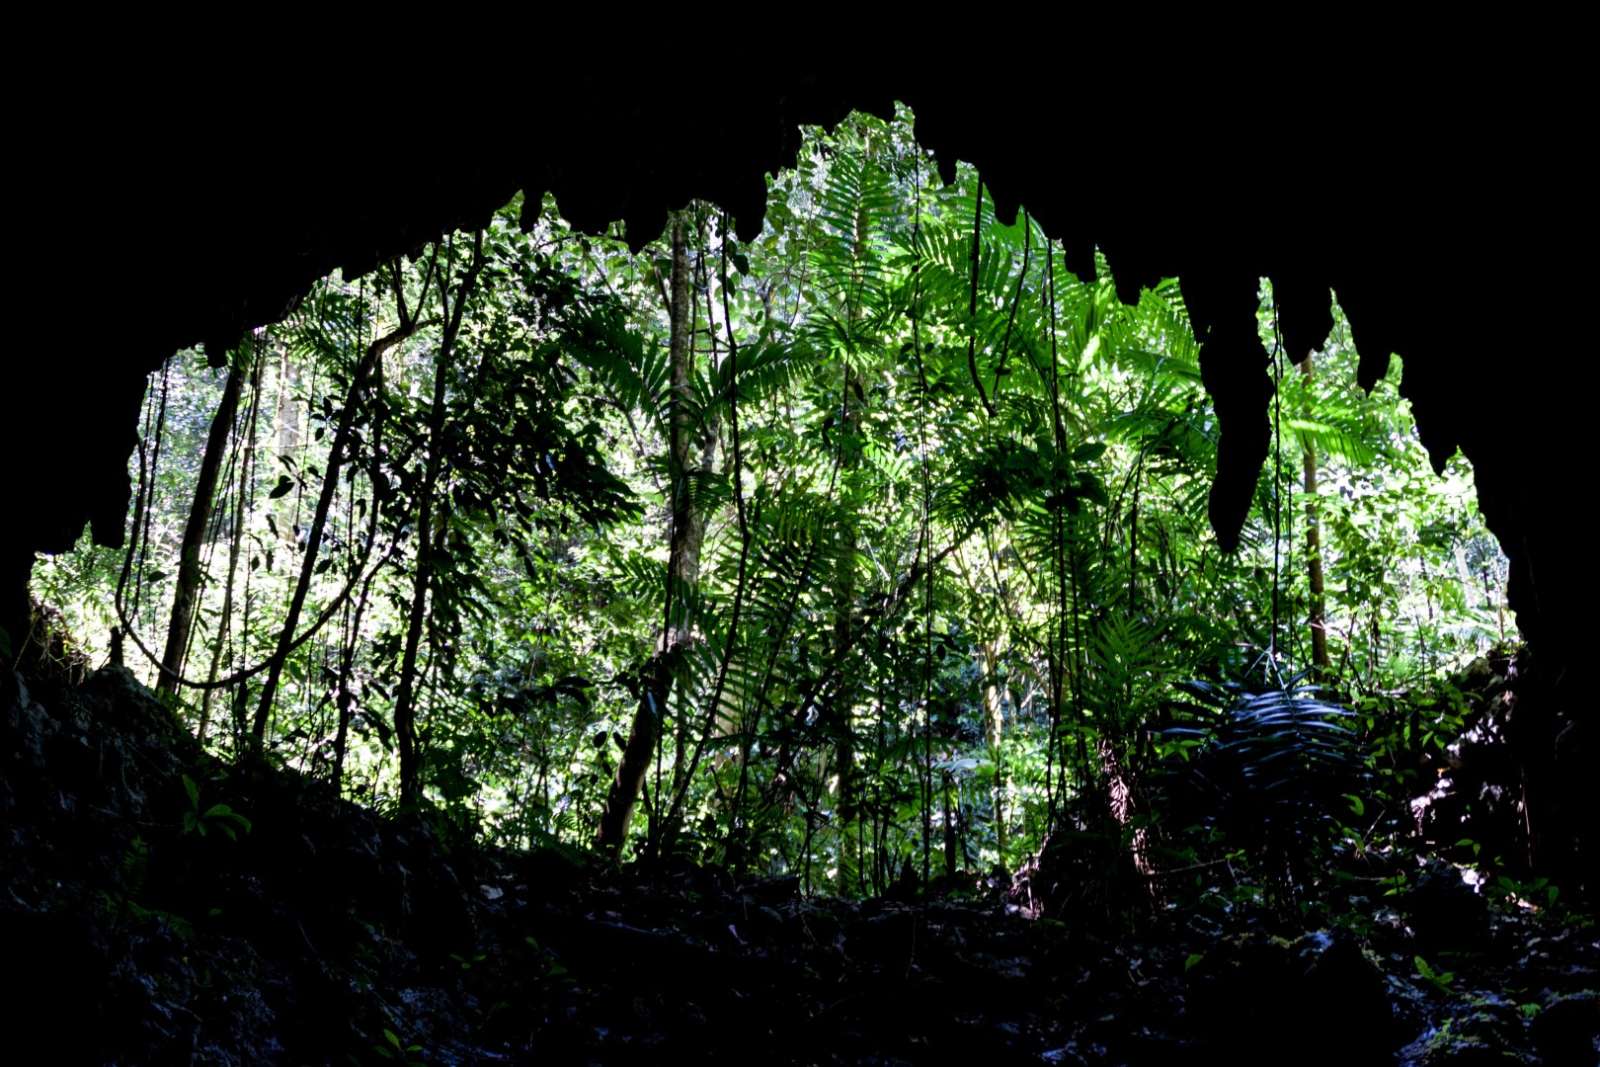 Roof cave opening at Candelaria, Guatemala